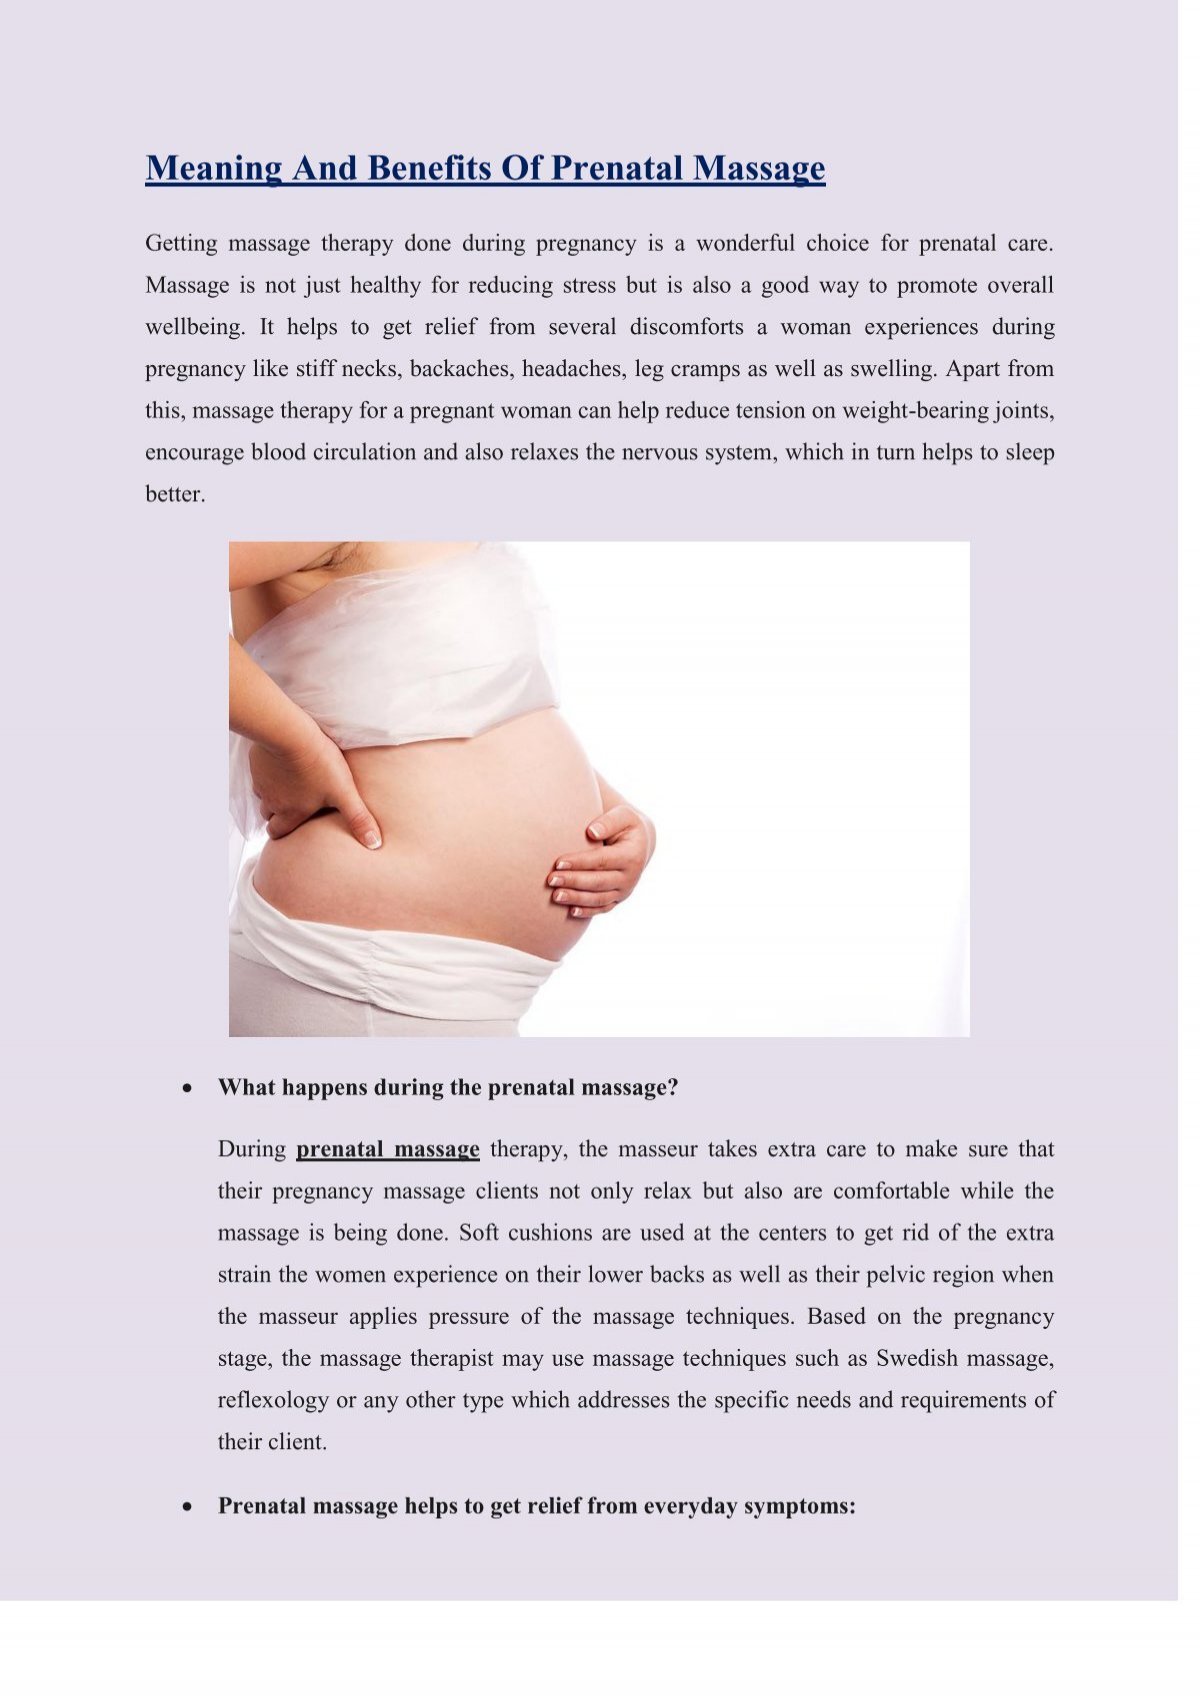 Meaning And Benefits Of Prenatal Massage